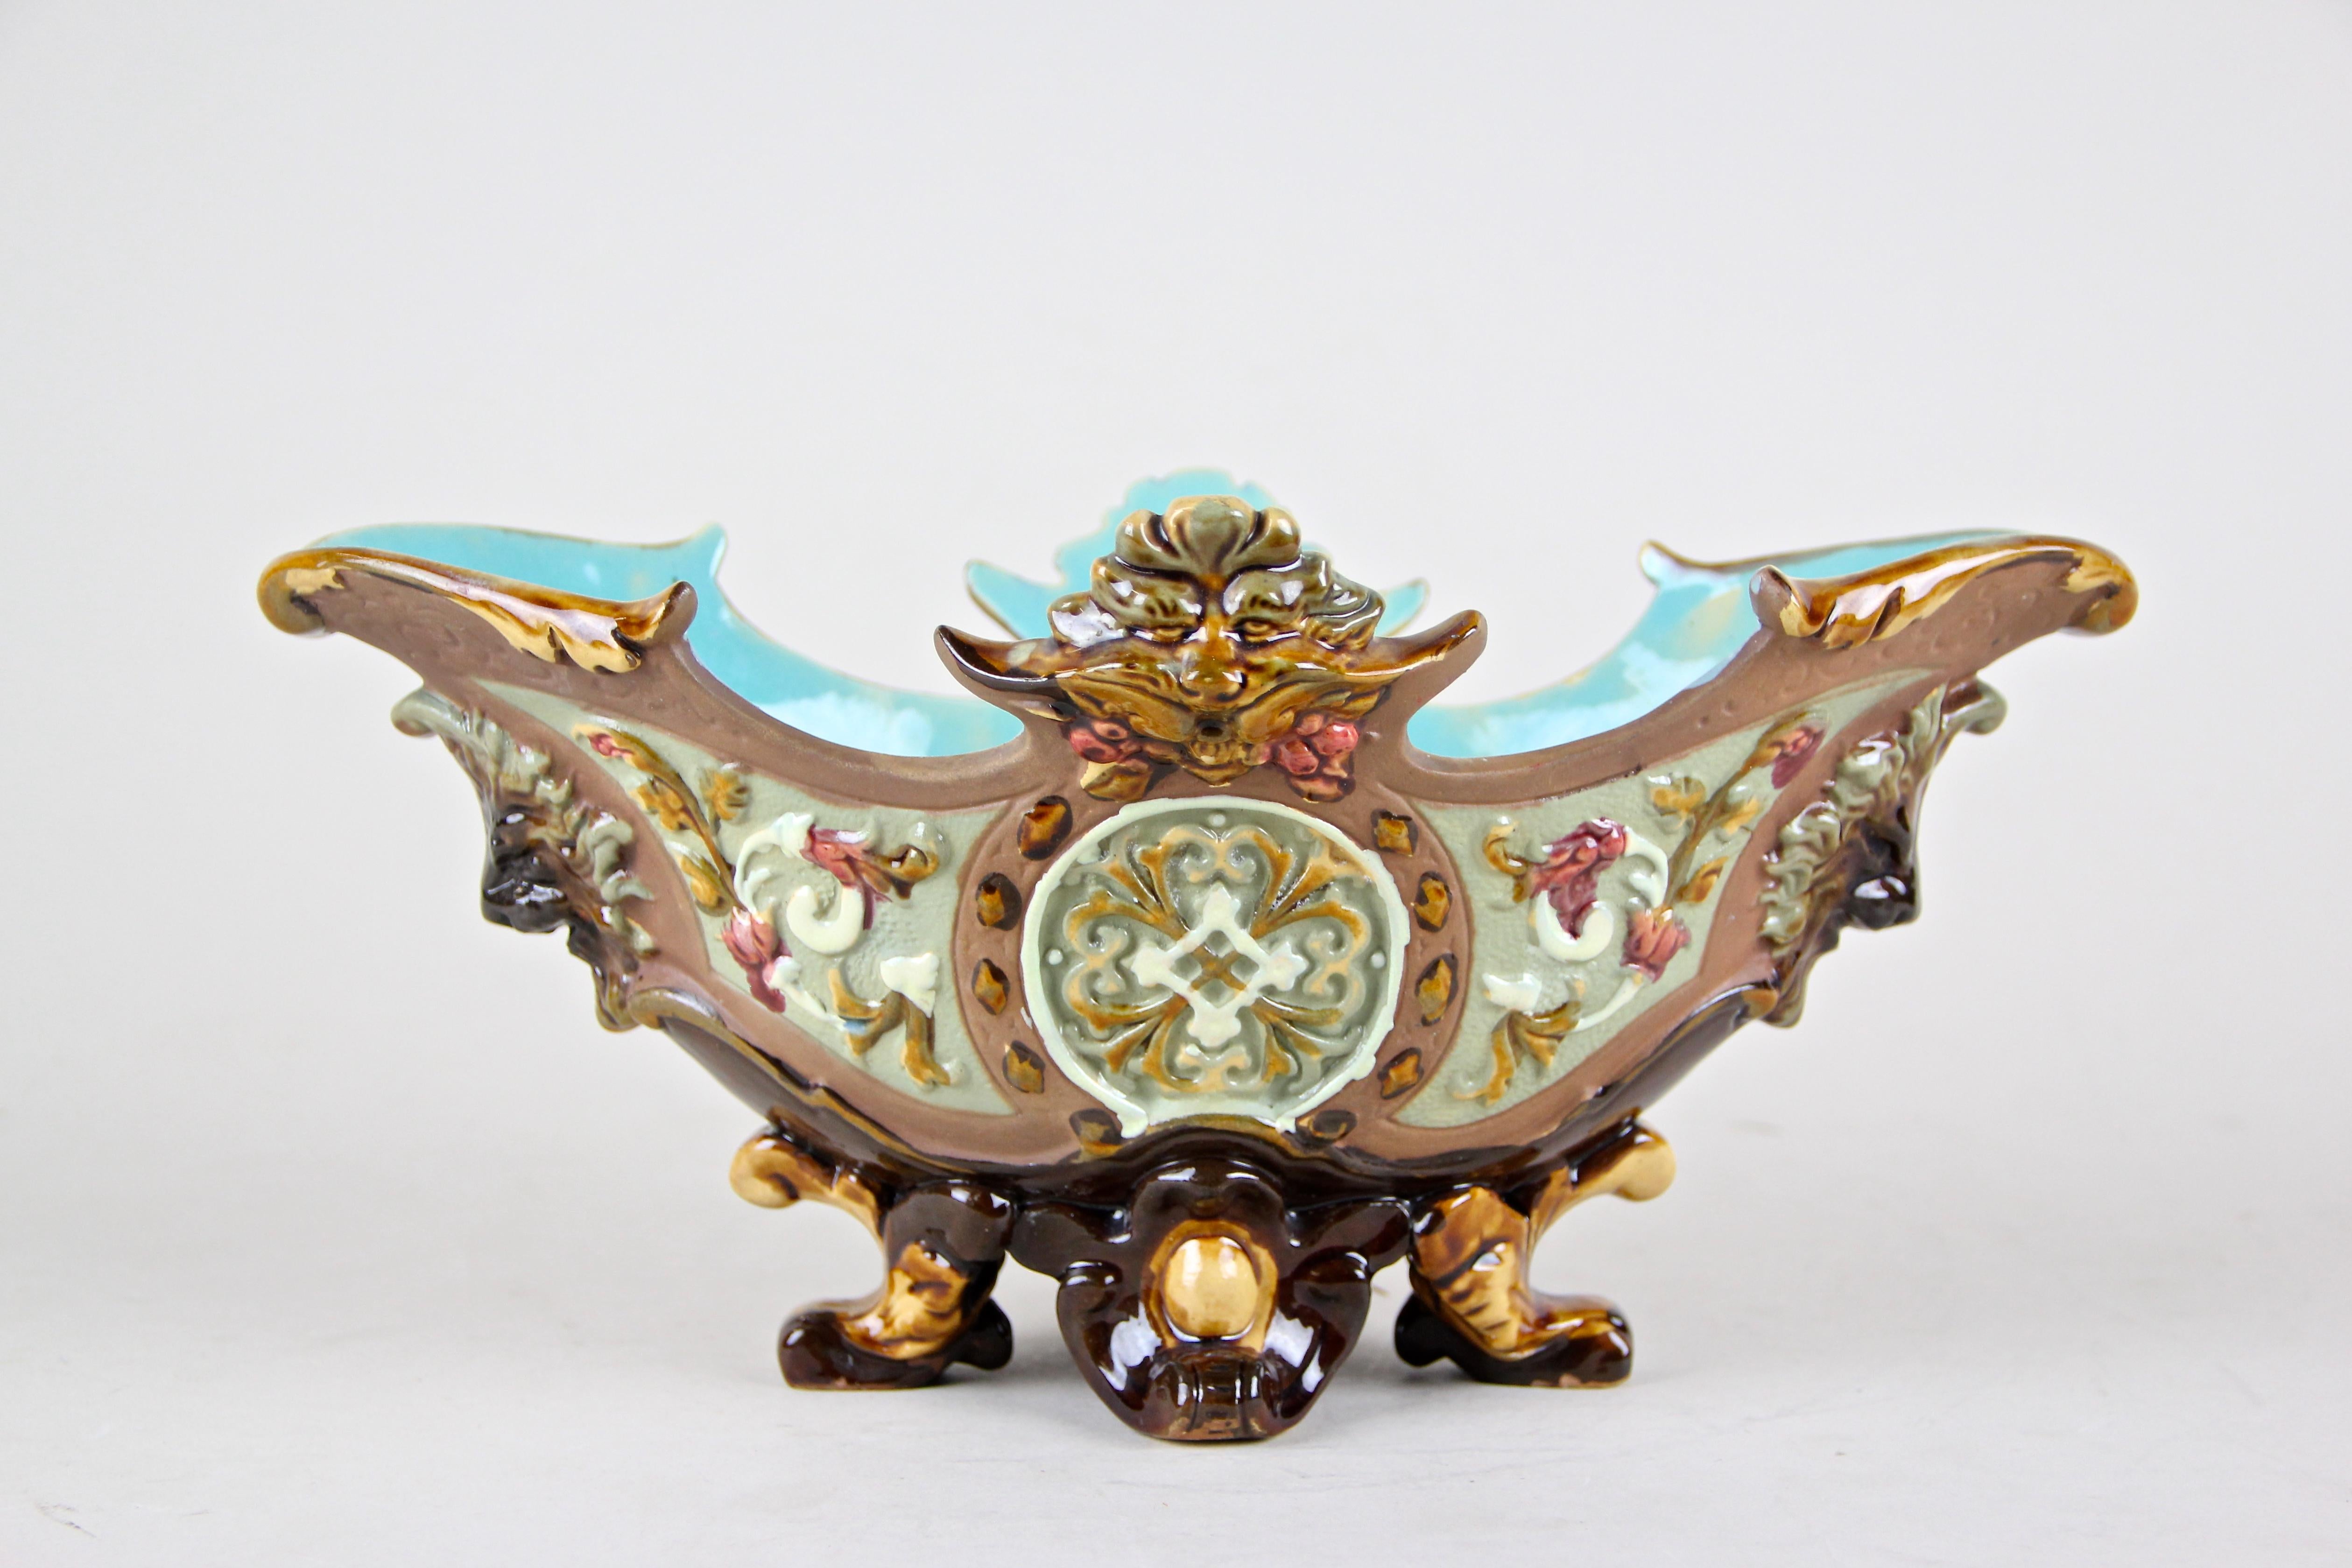 Delightful 19th century Majolica Jardinière out of the renown workshops of Wilhelm Schiller & Son in Bohemia around 1890. A beautiful uncommon shaped small jardiniere coming with a lovely hand-painted floral design - typical for pieces out of this